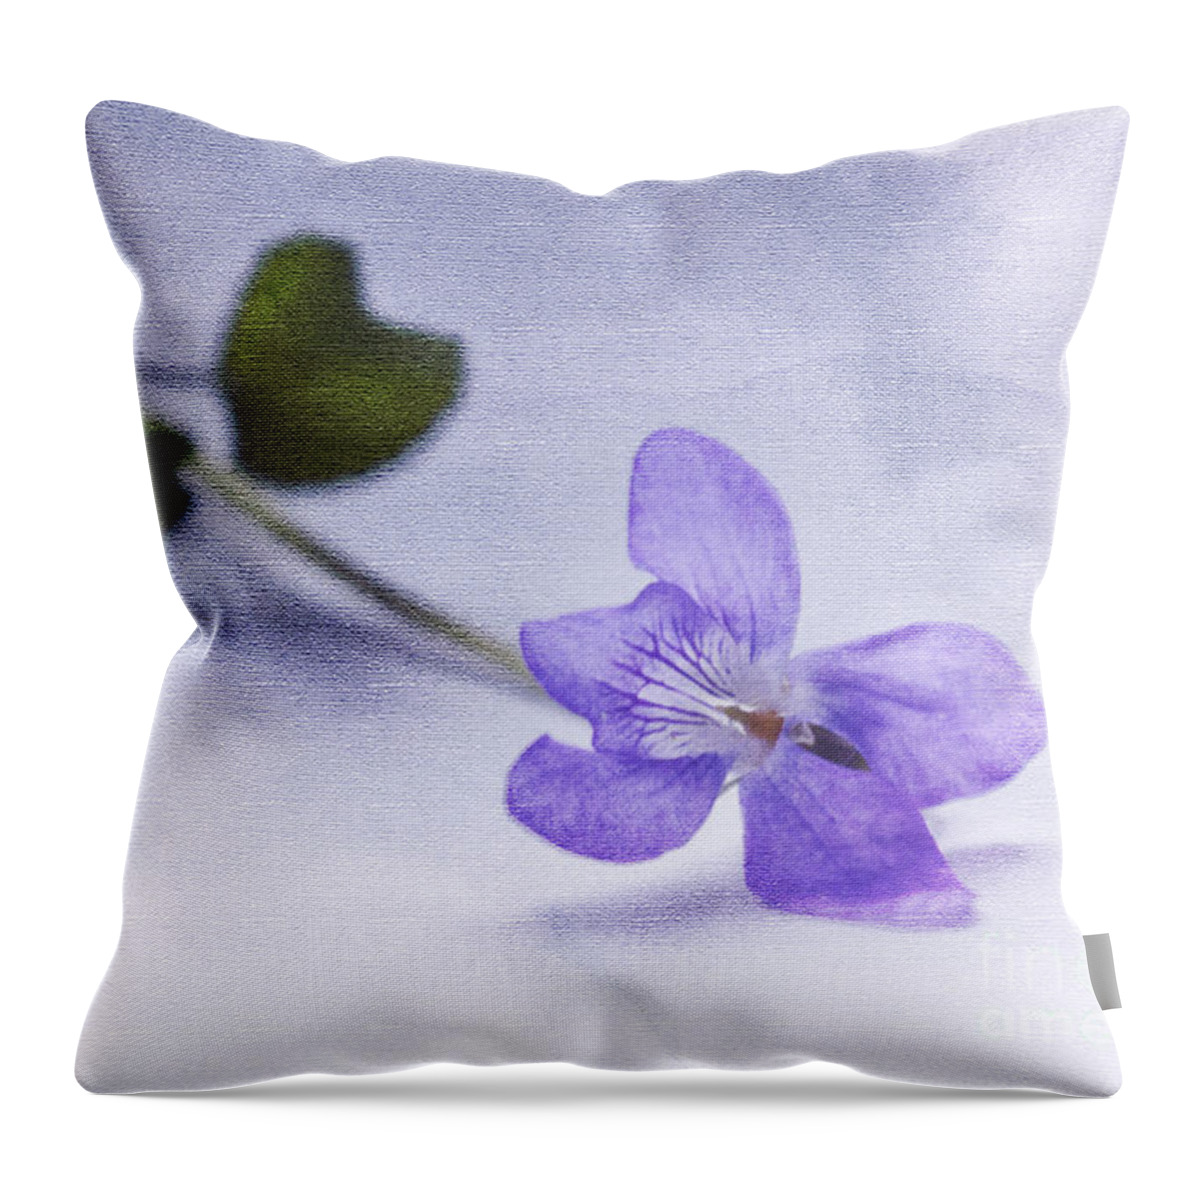 Purple Throw Pillow featuring the photograph Violet by Terri Waters